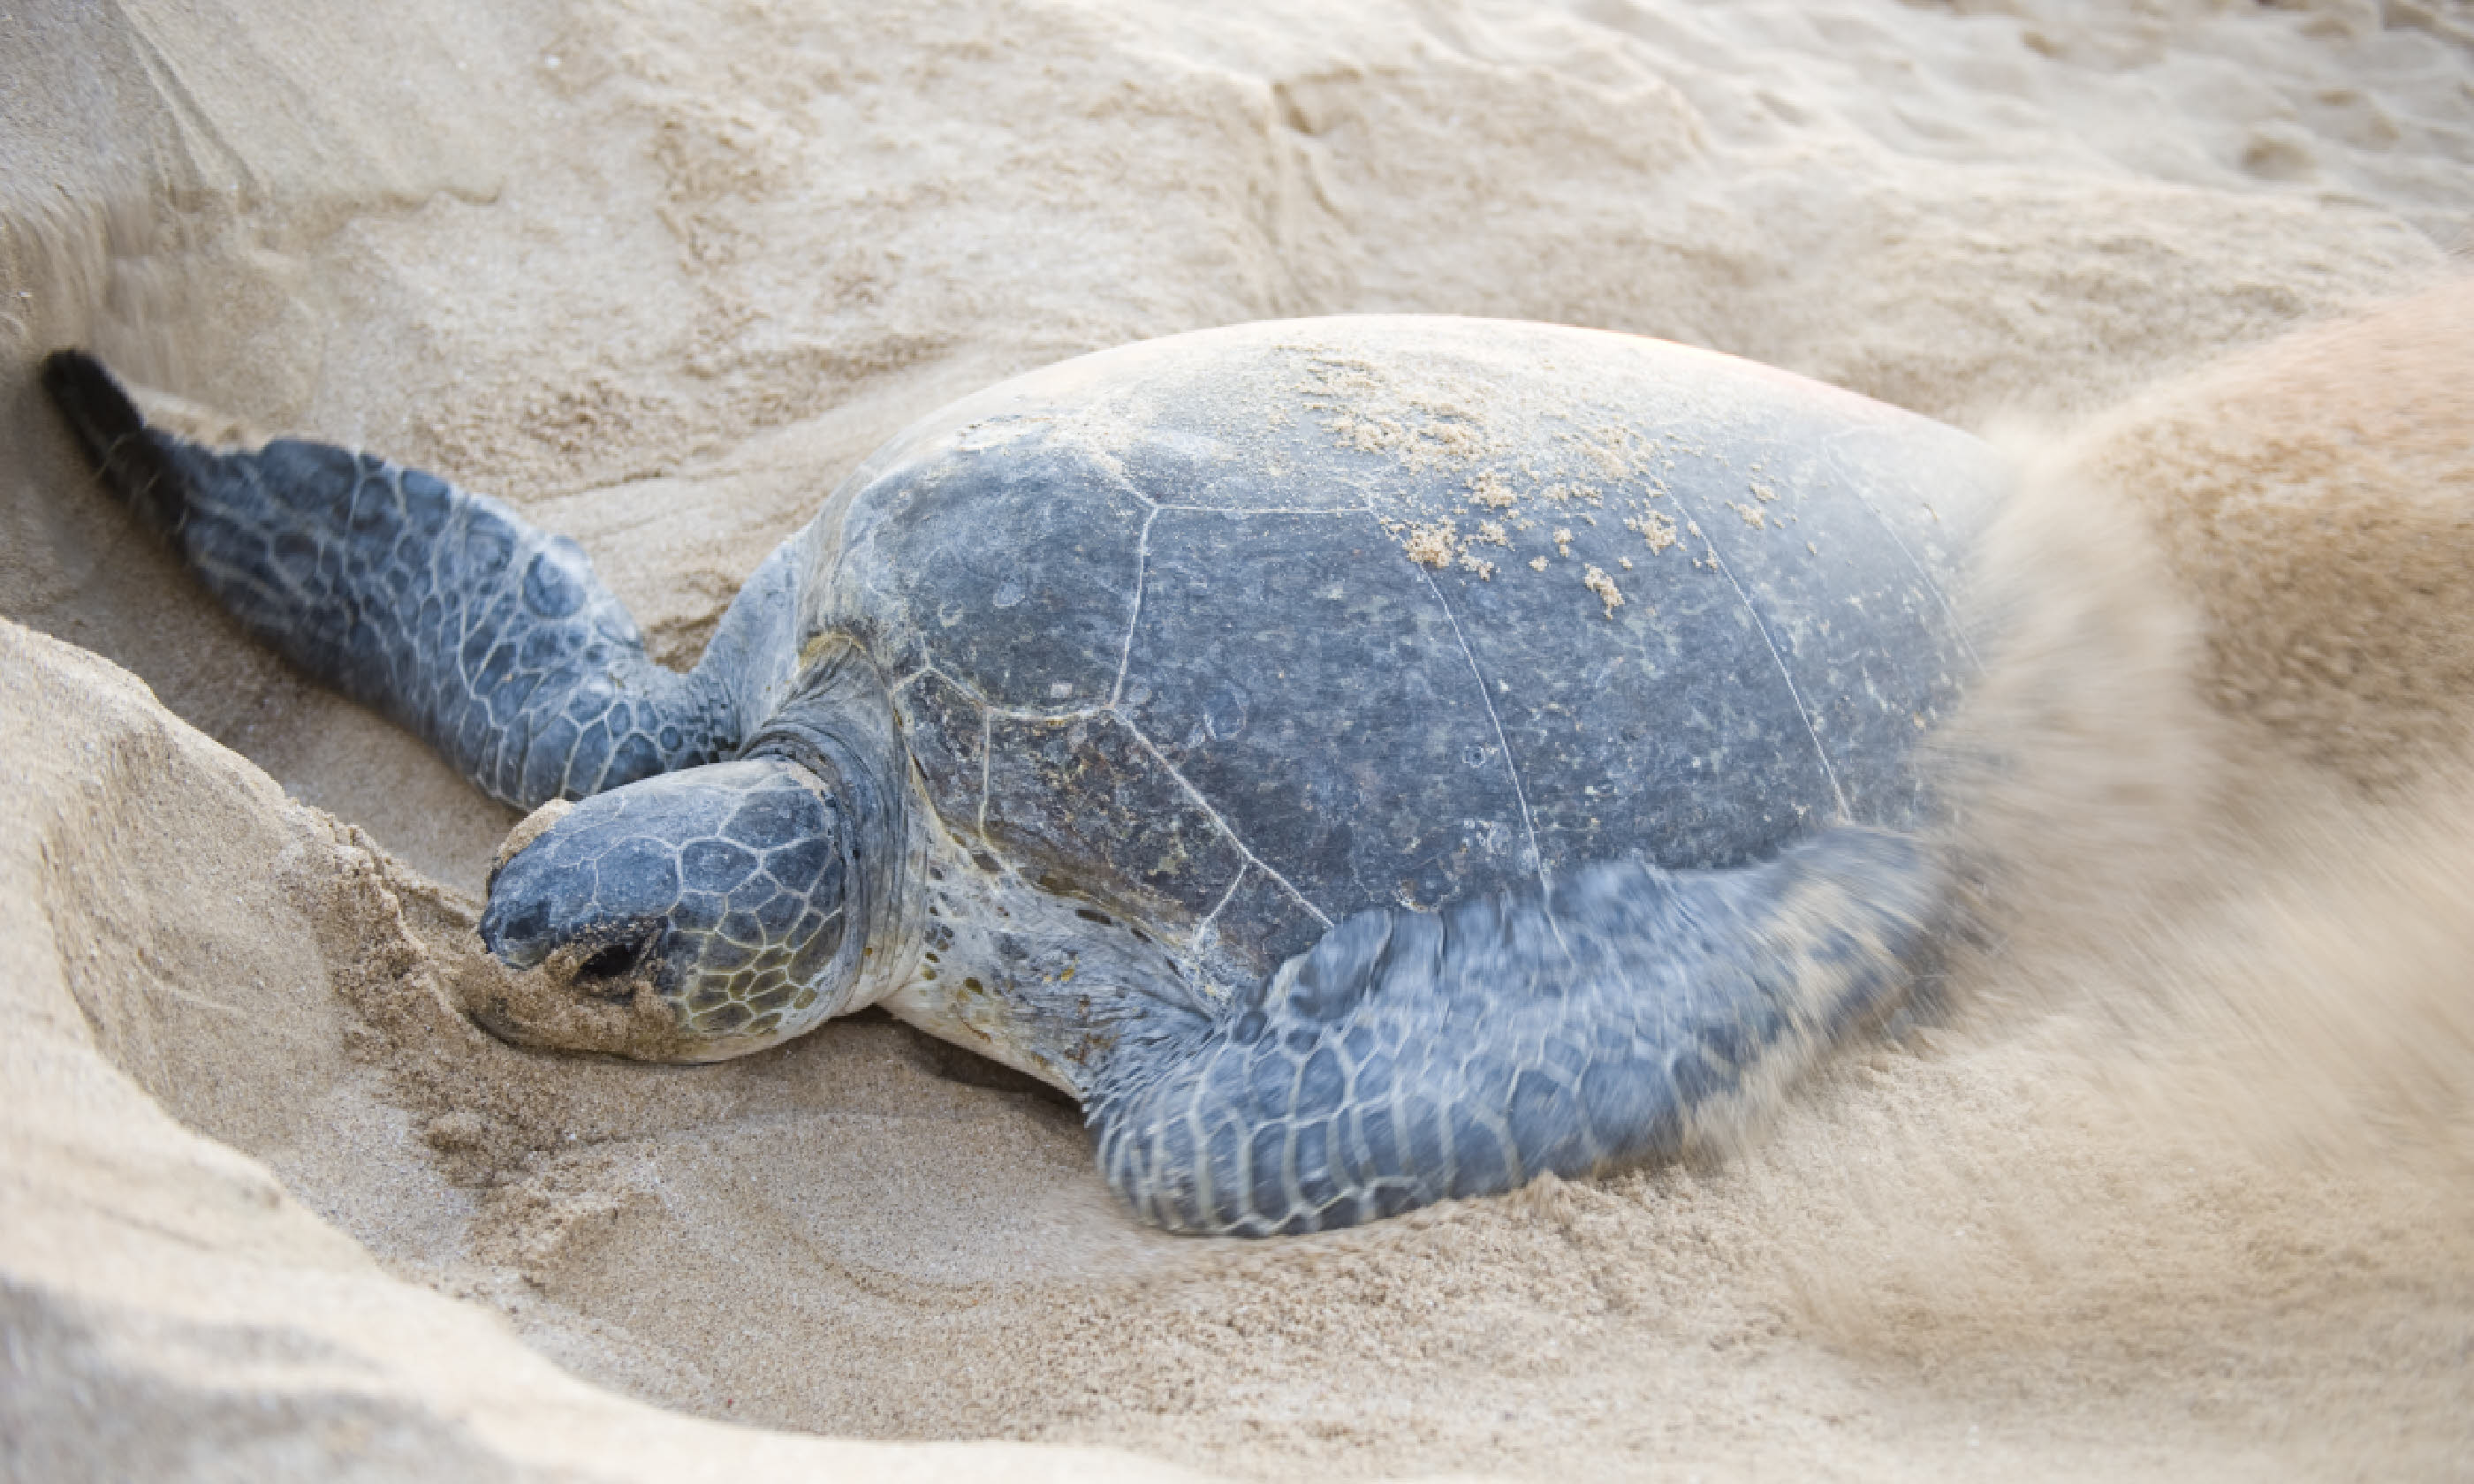 Green Back Turtle busy closing a nest (Shutterstock)